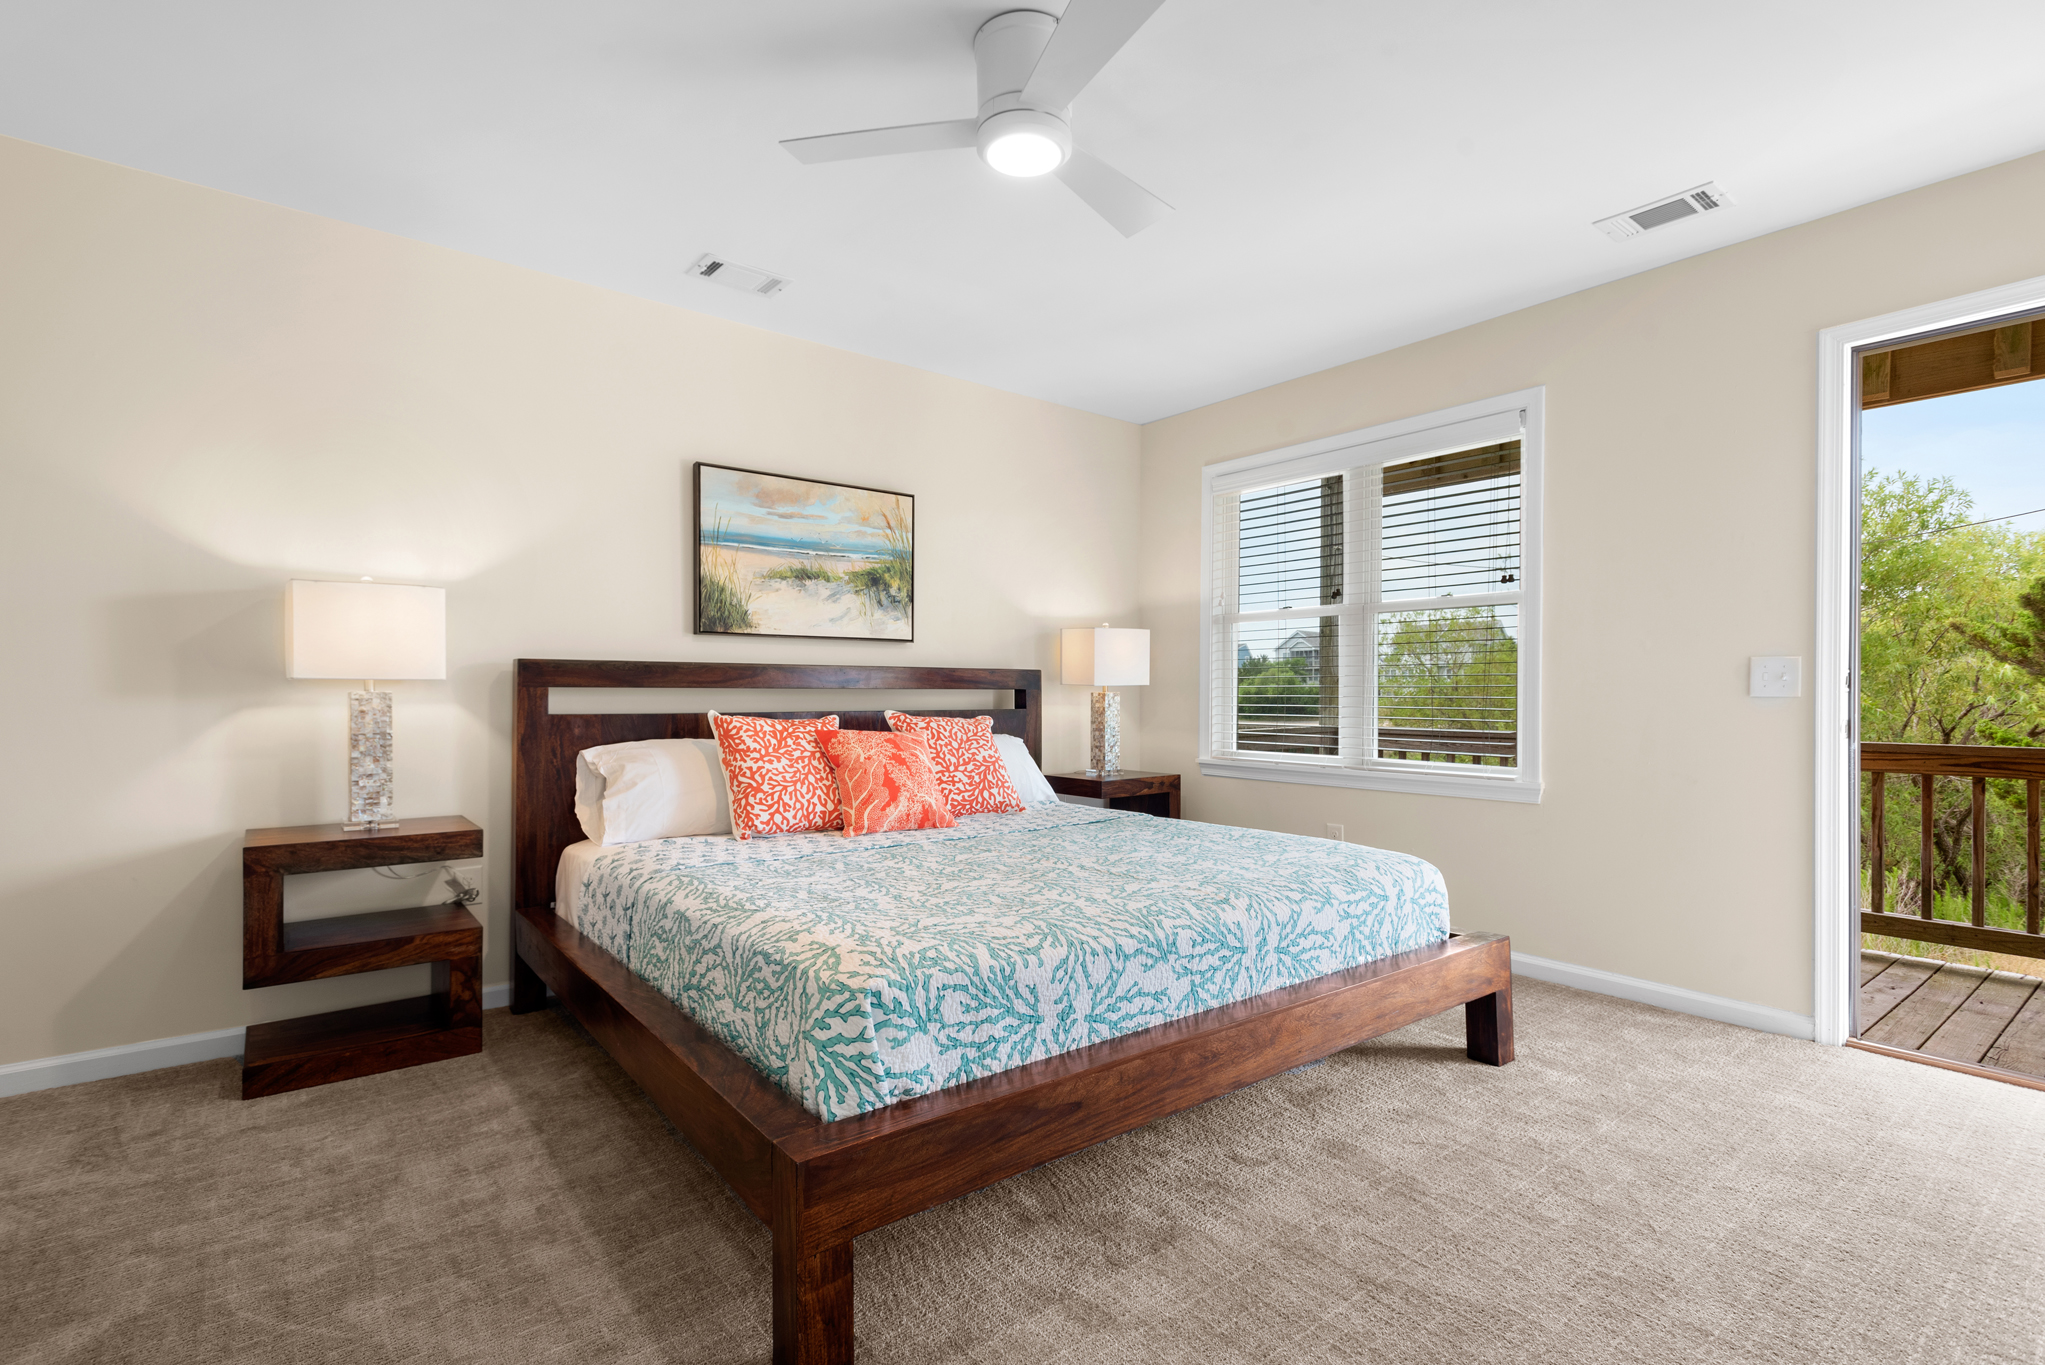 L32: Cloudless Day | Bottom Level Bedroom 1